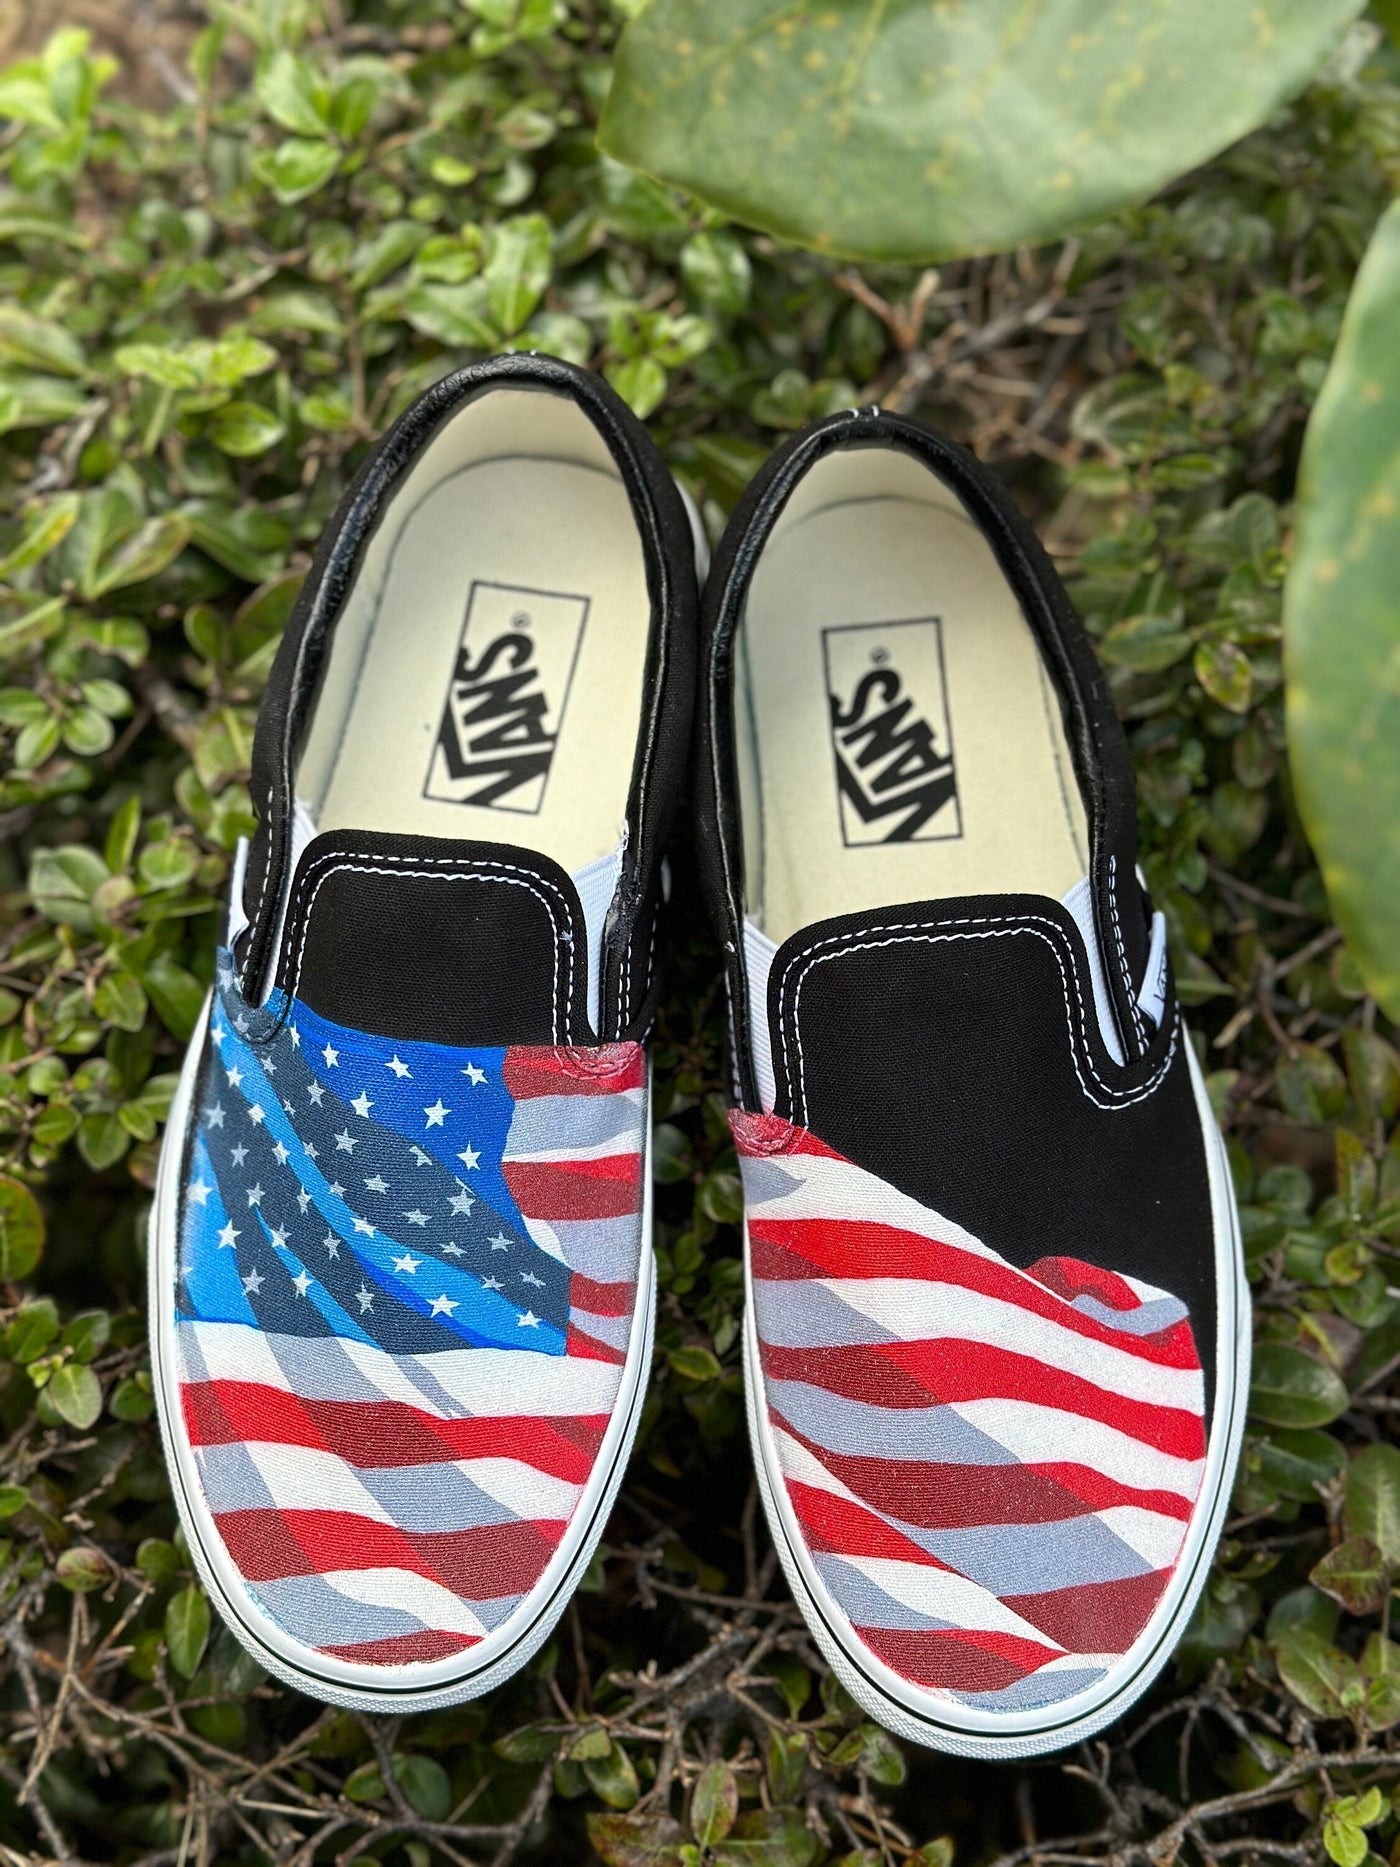 Black Slip On Vans Shoes for Men and Women Featuring American Flag